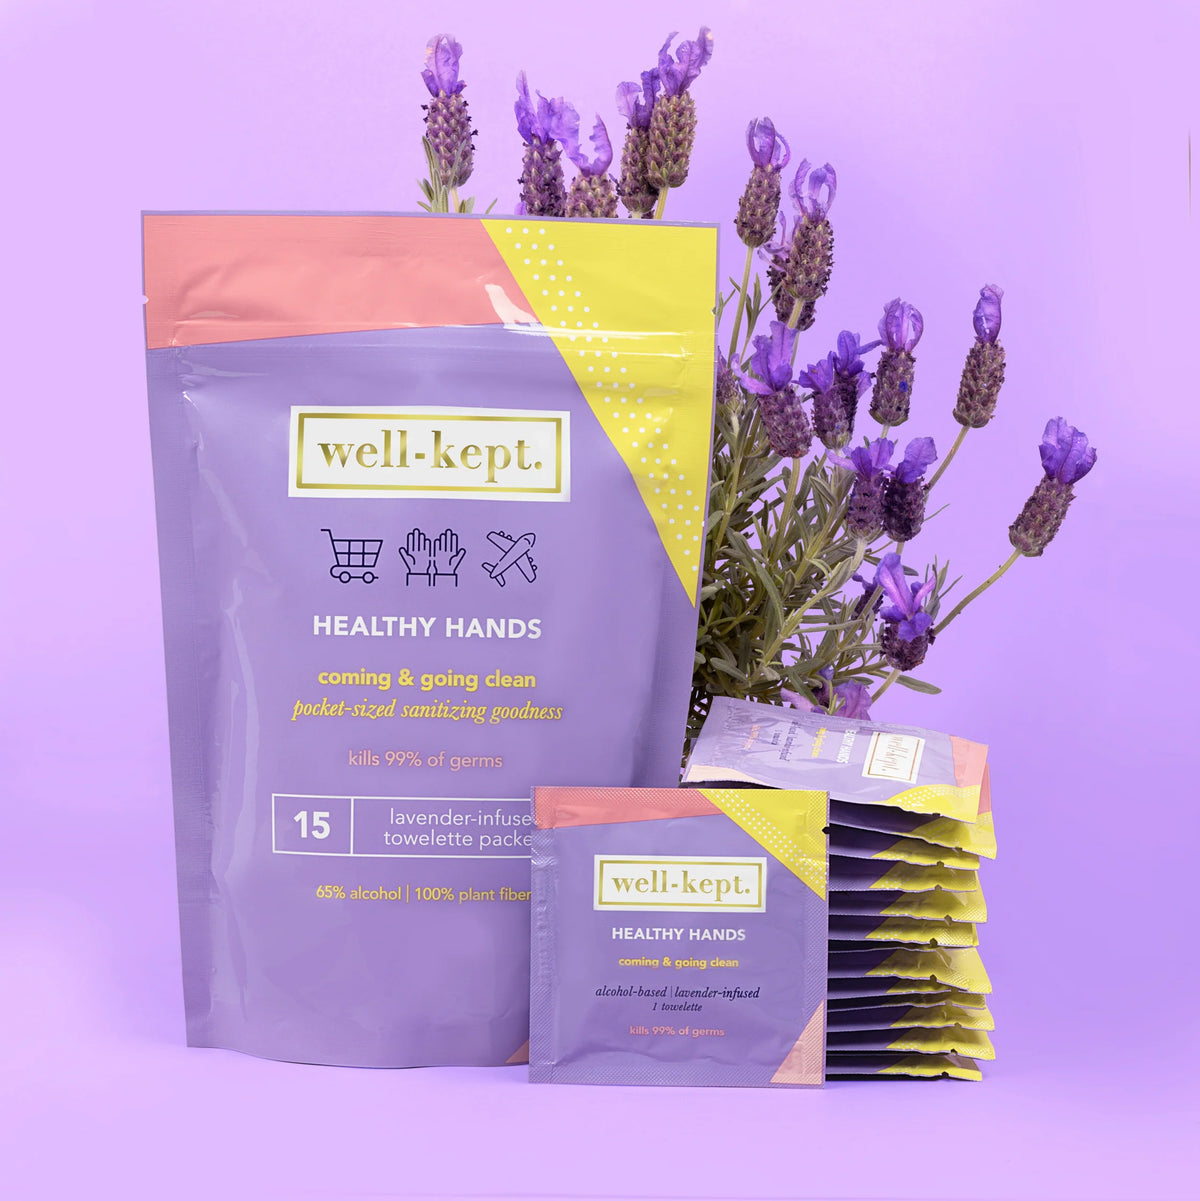 Healthy Hands Pocket Sanitizing Wipes - The Preppy Bunny